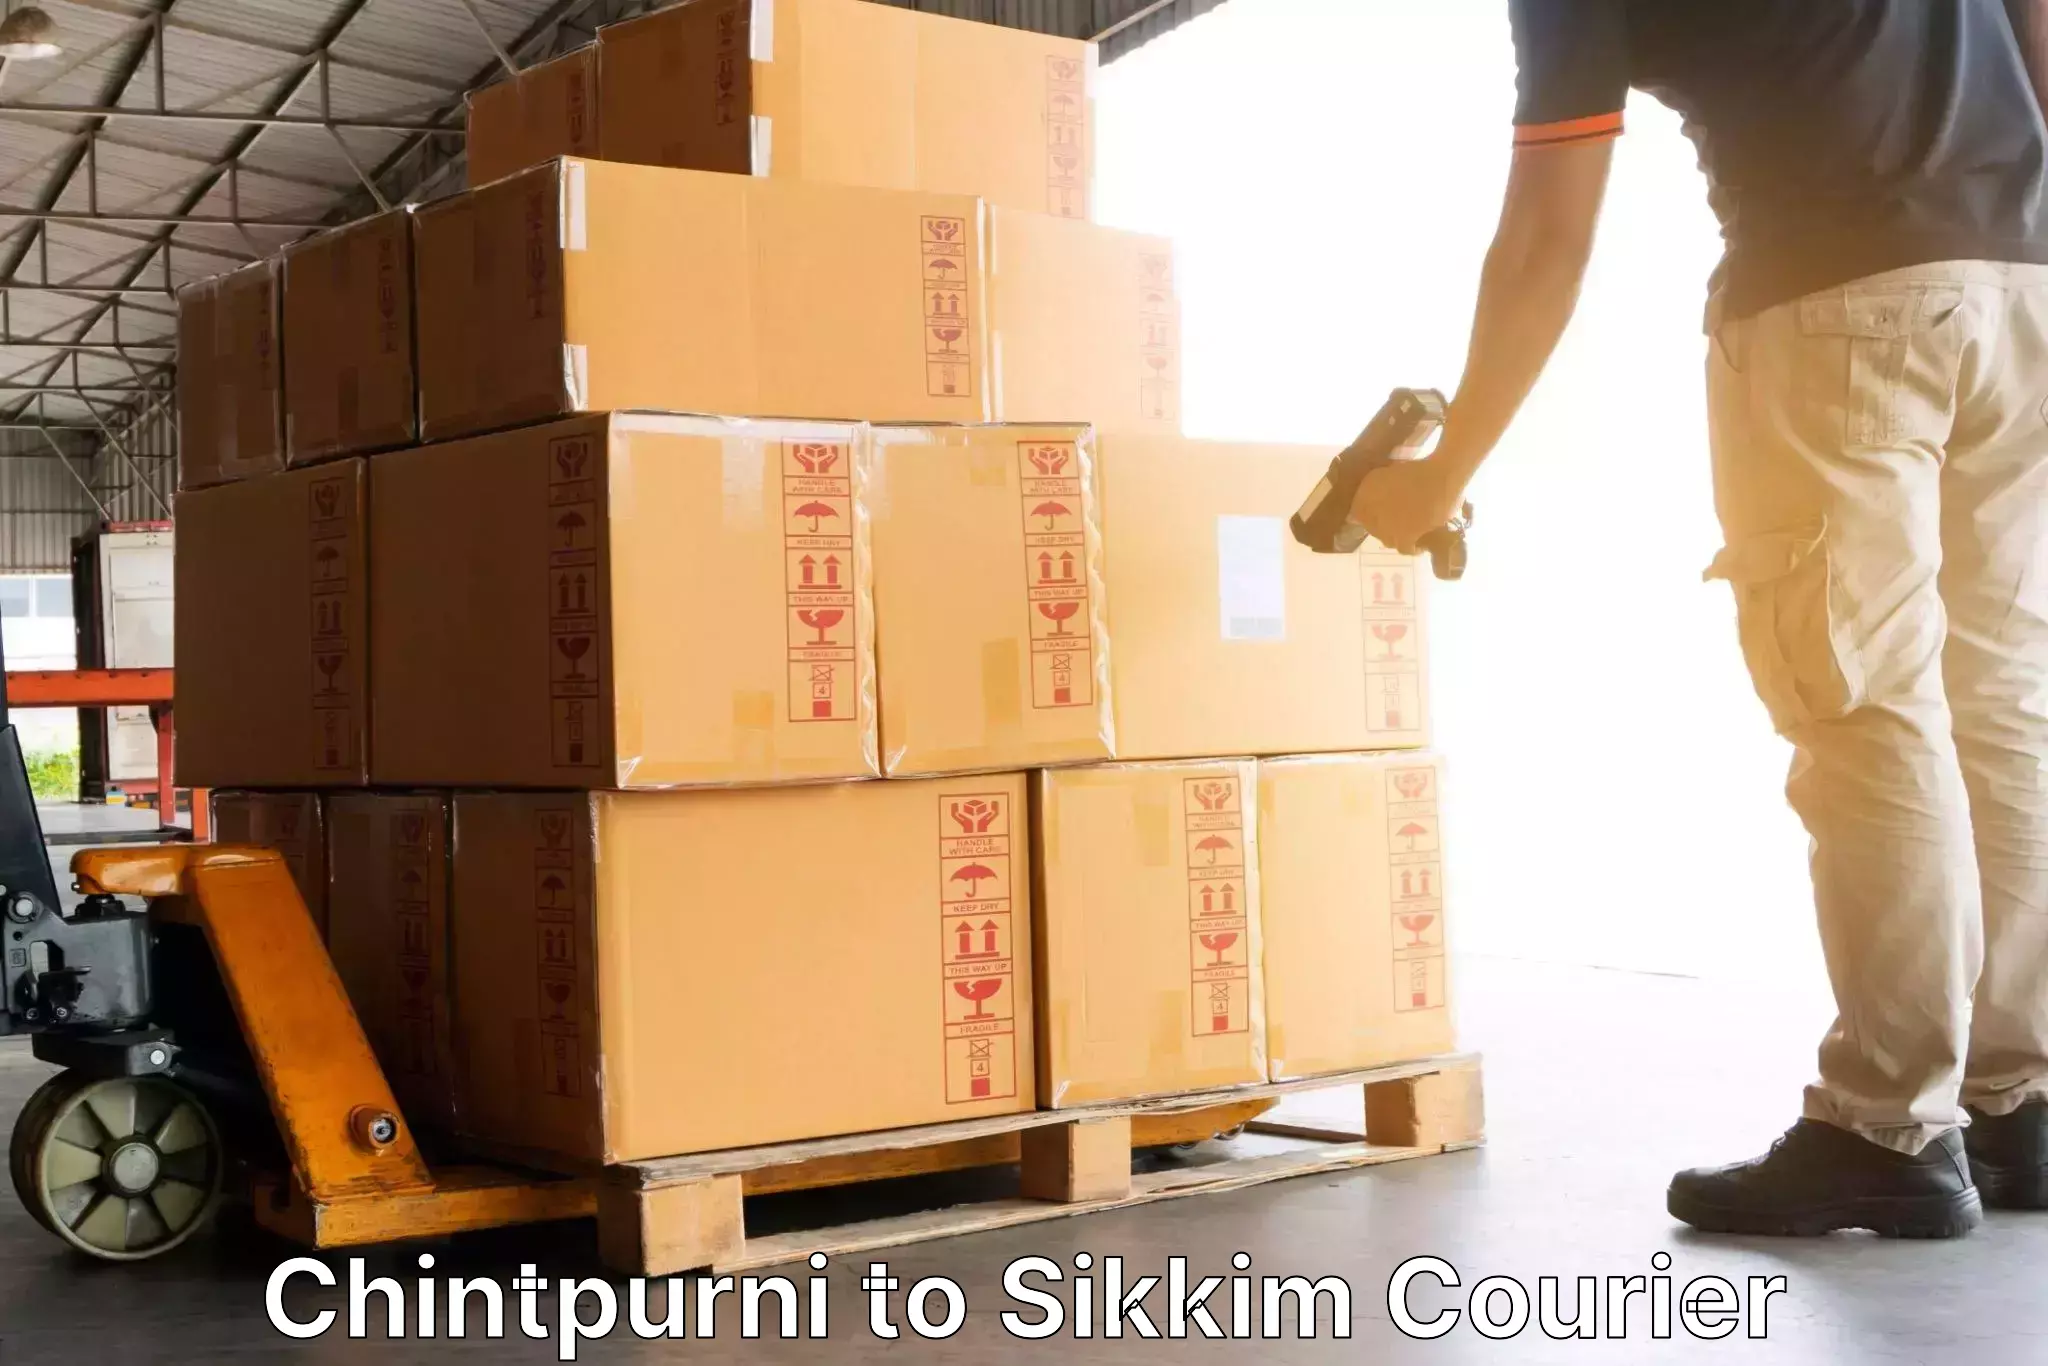 Air courier services Chintpurni to Jorethang